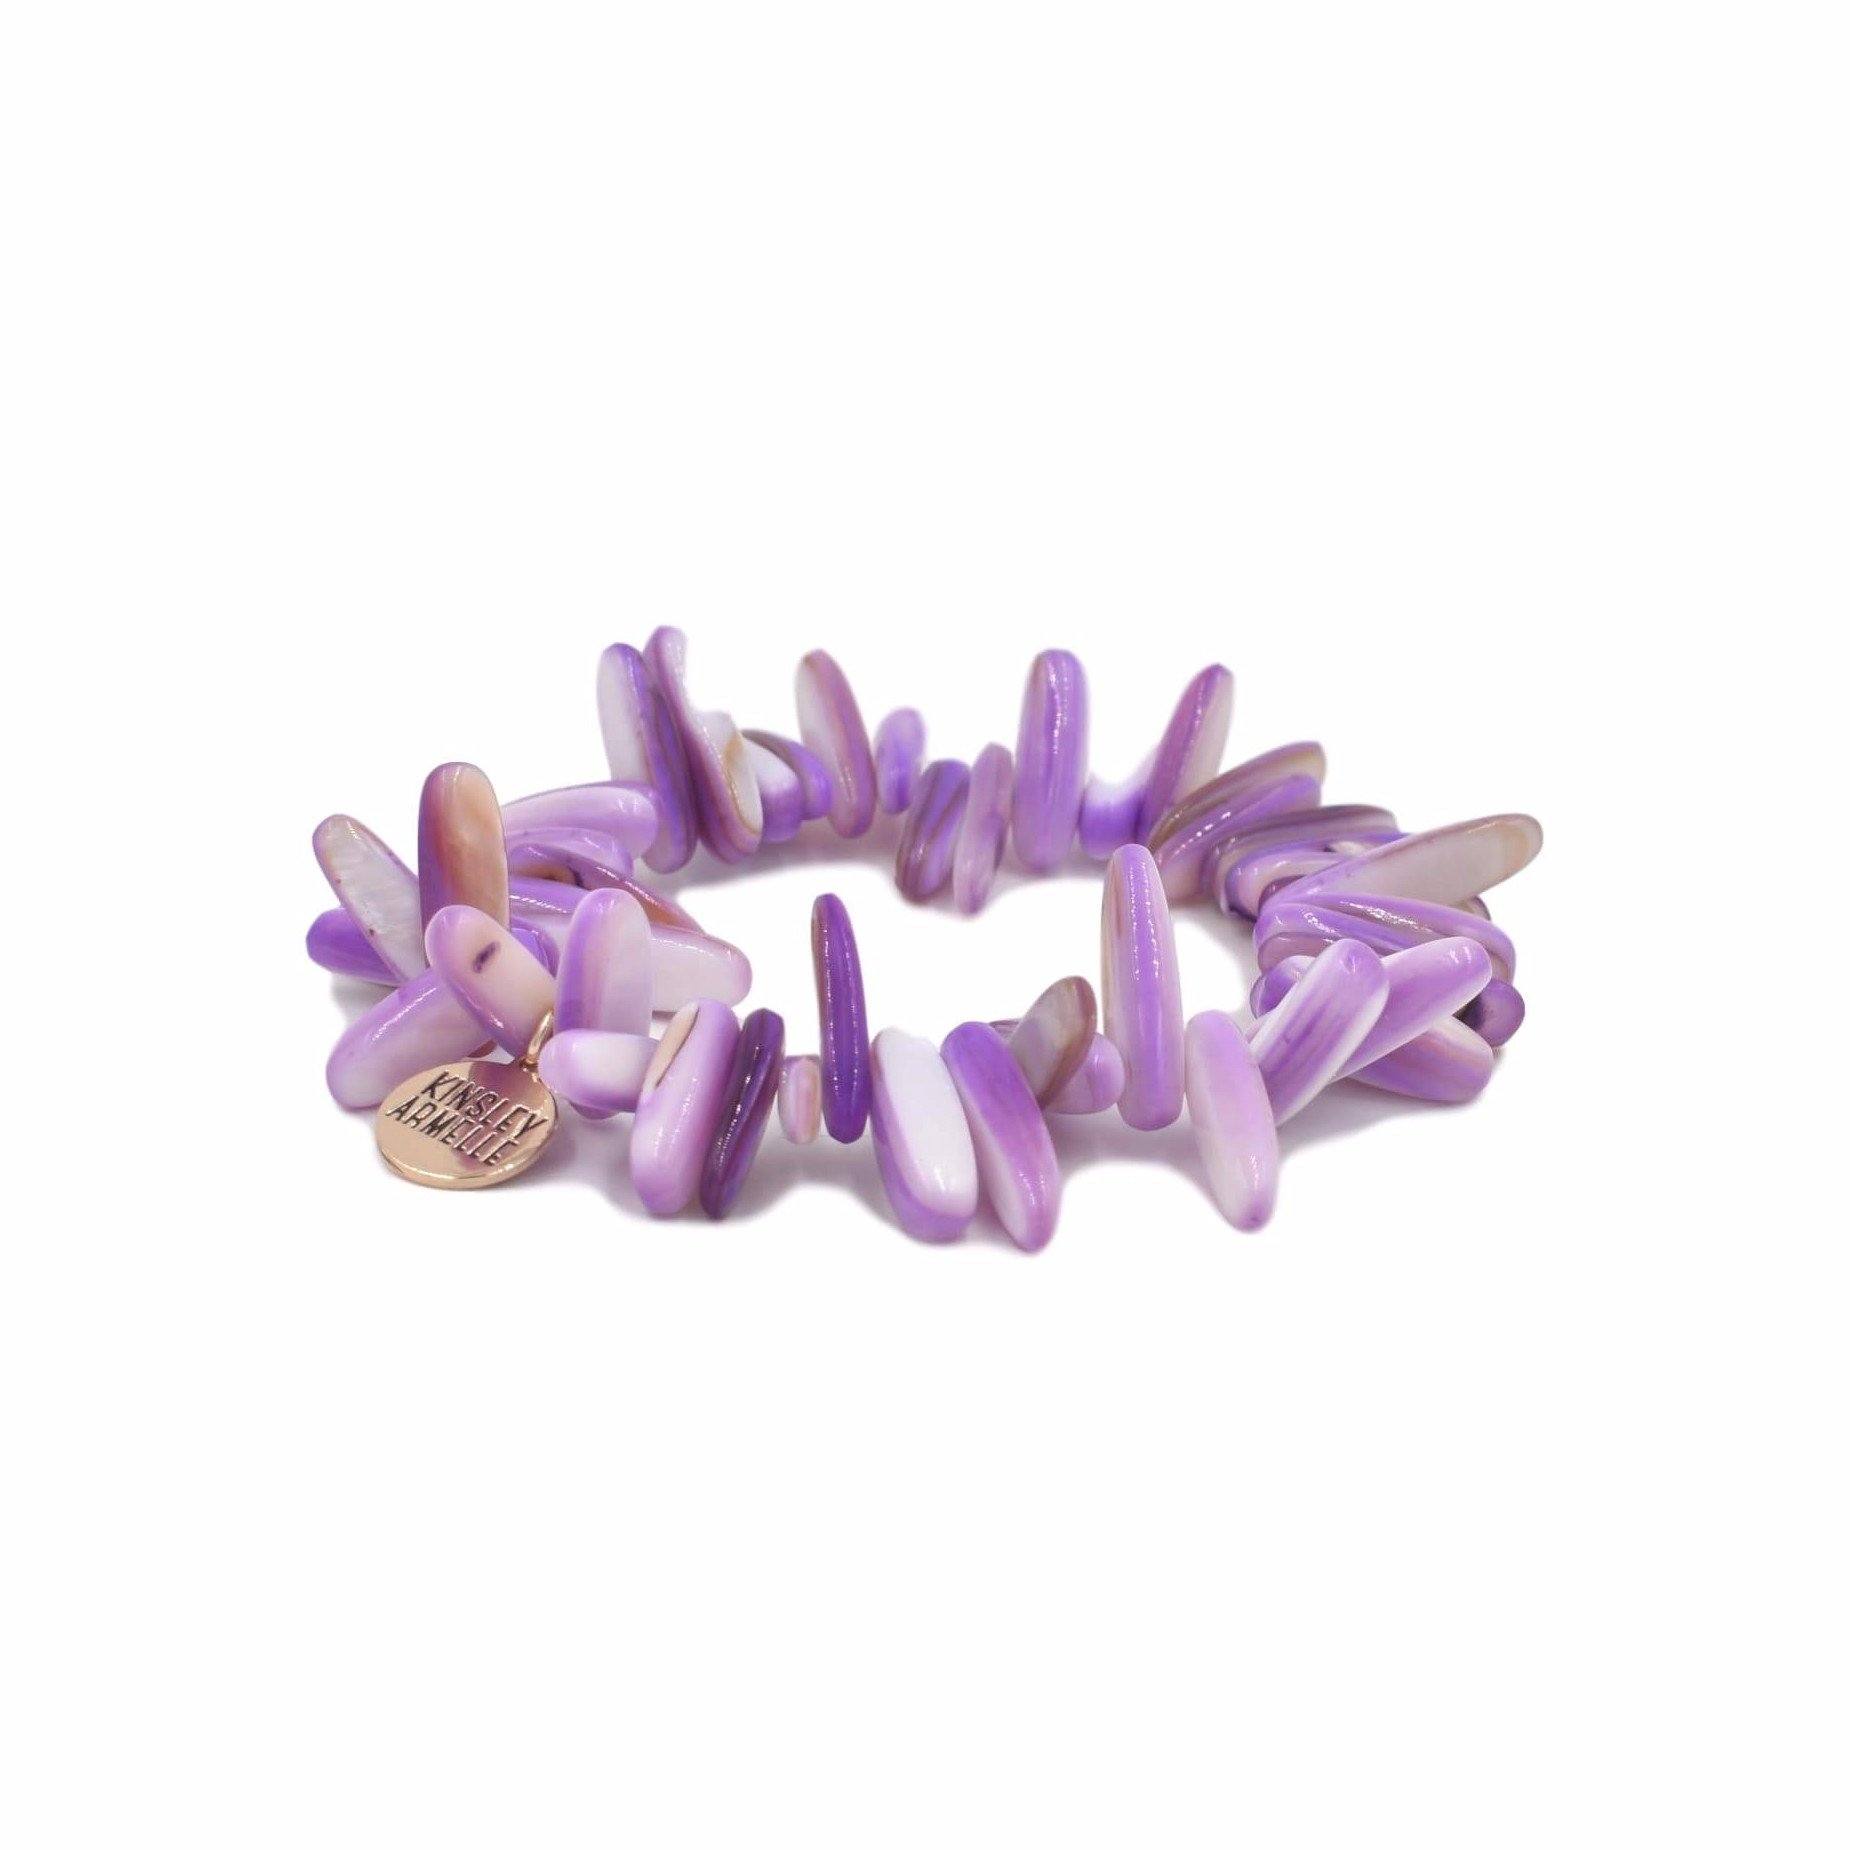 Chip Collection - Wild Orchid Bracelet fine designer jewelry for men and women